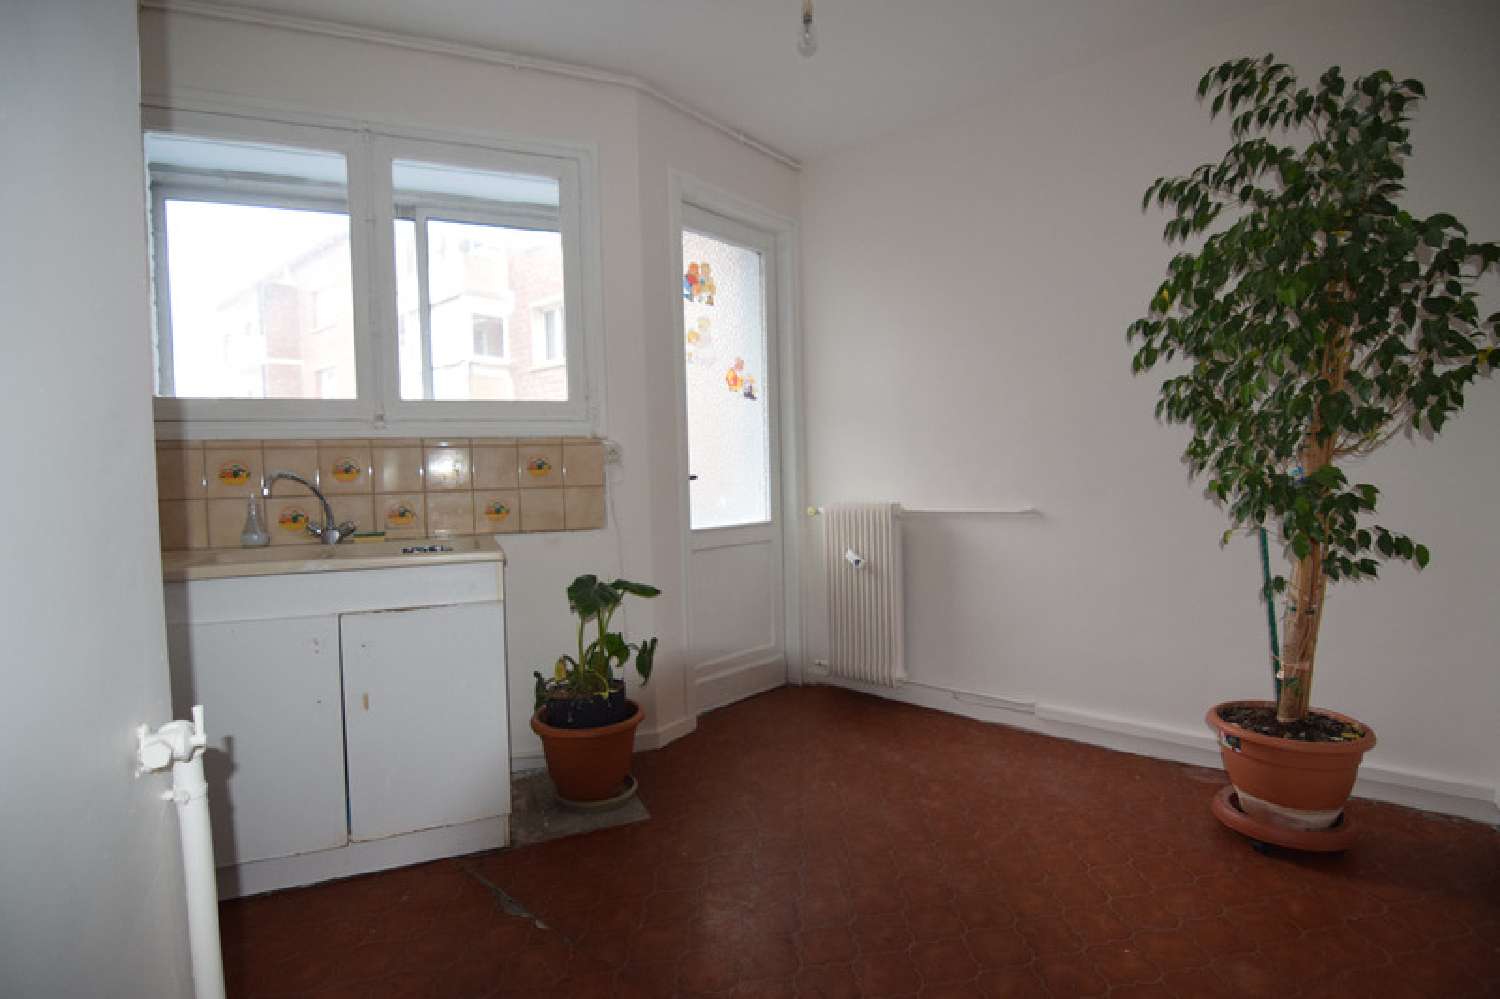  kaufen Wohnung/ Apartment Fâches-Thumesnil Nord 6